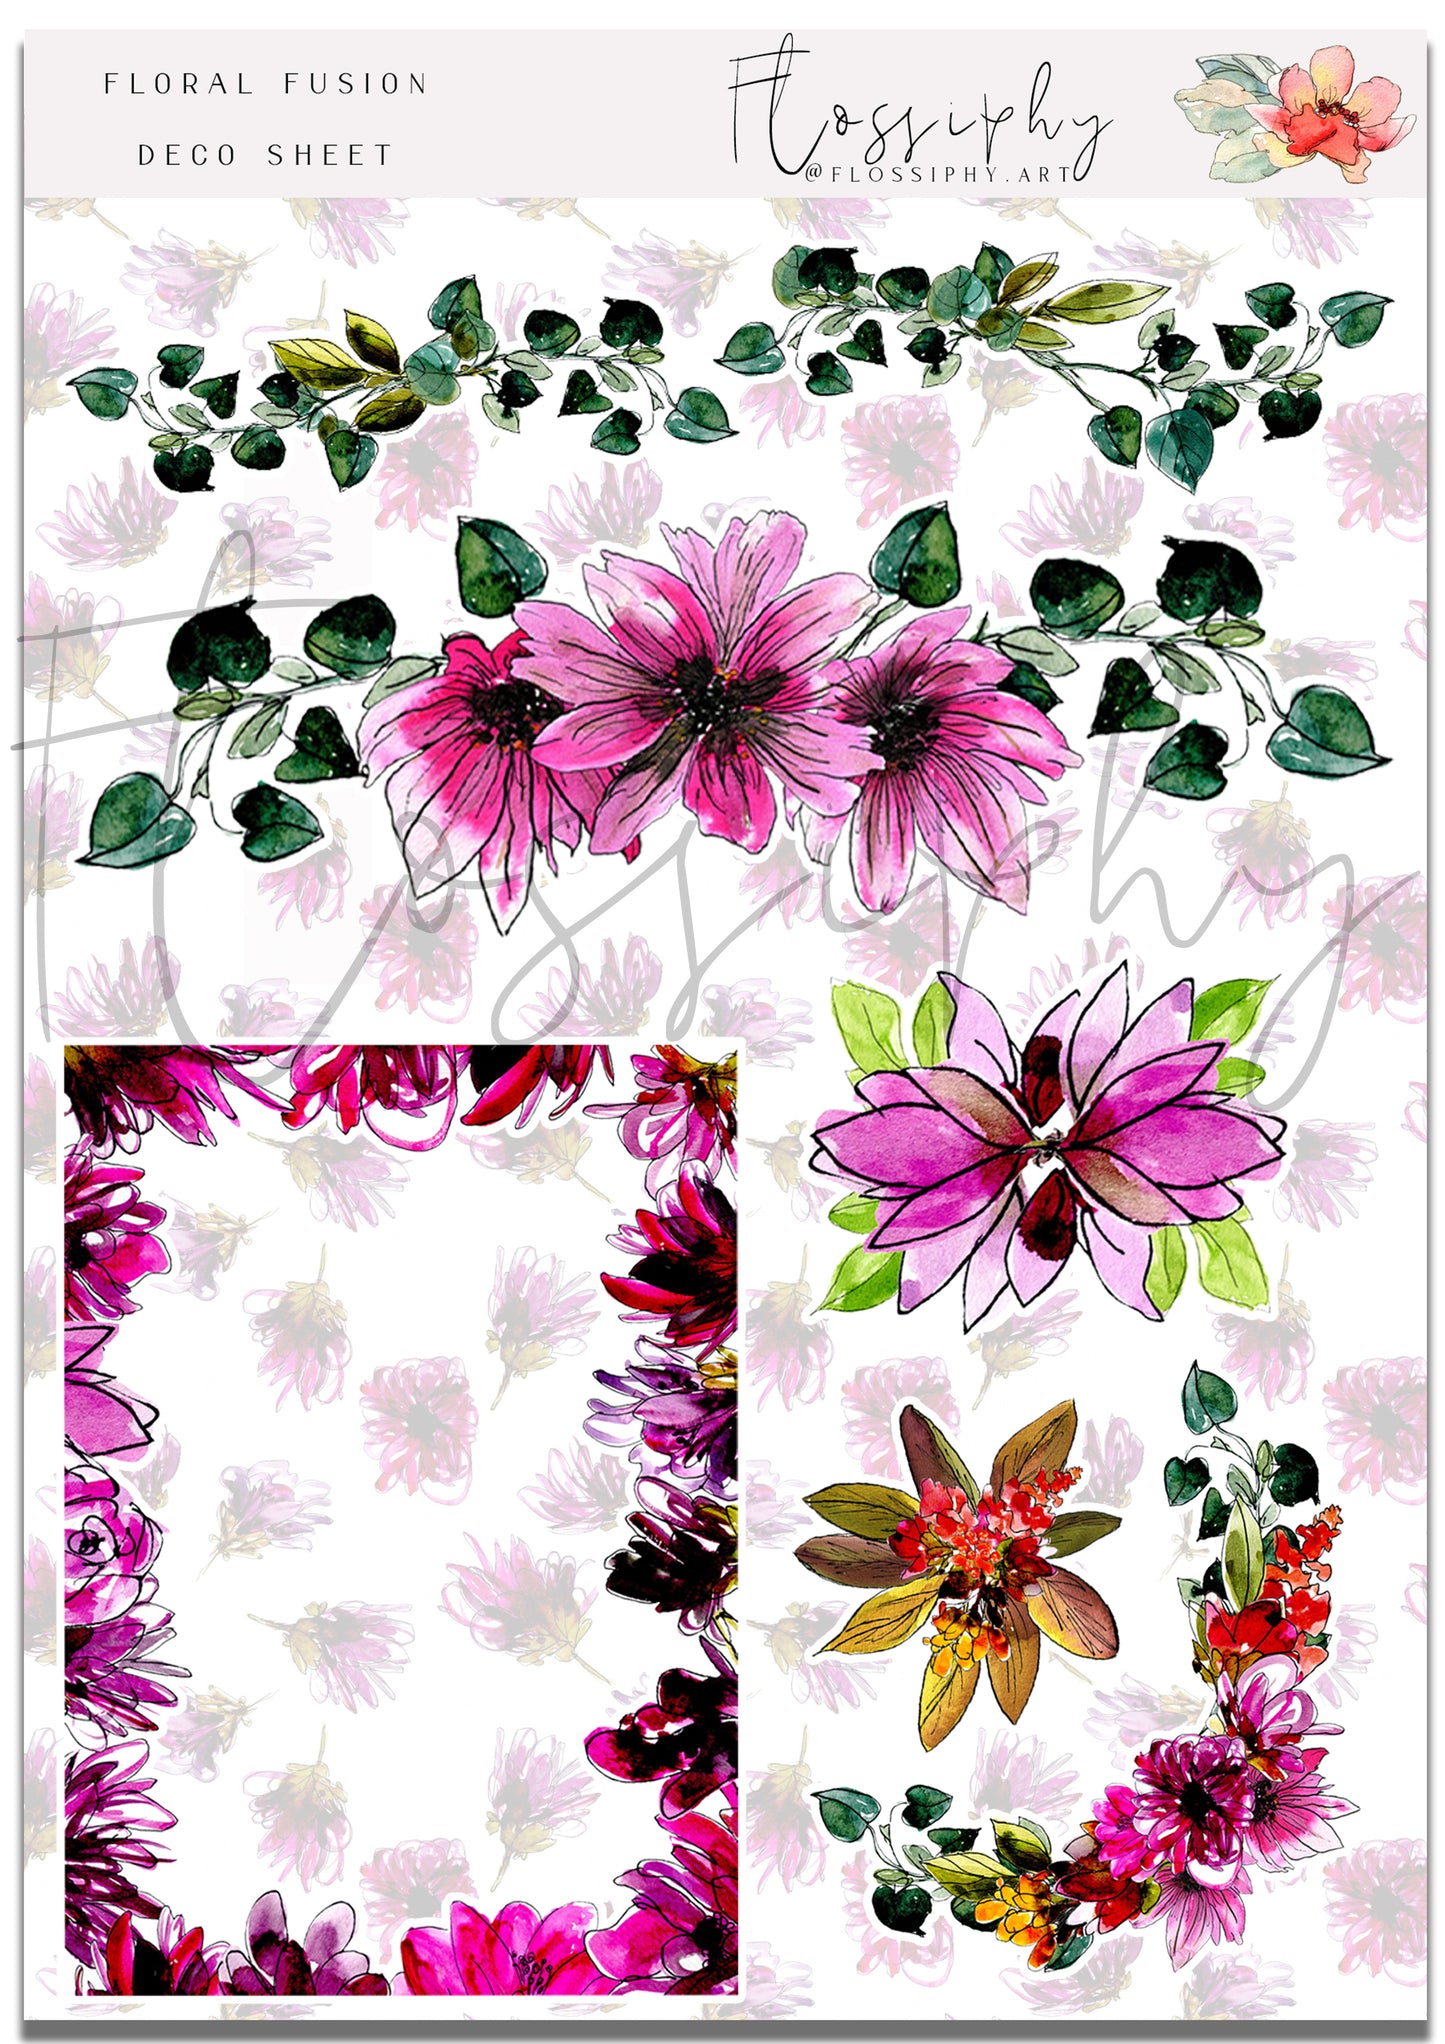 Floral Fusion Stickers